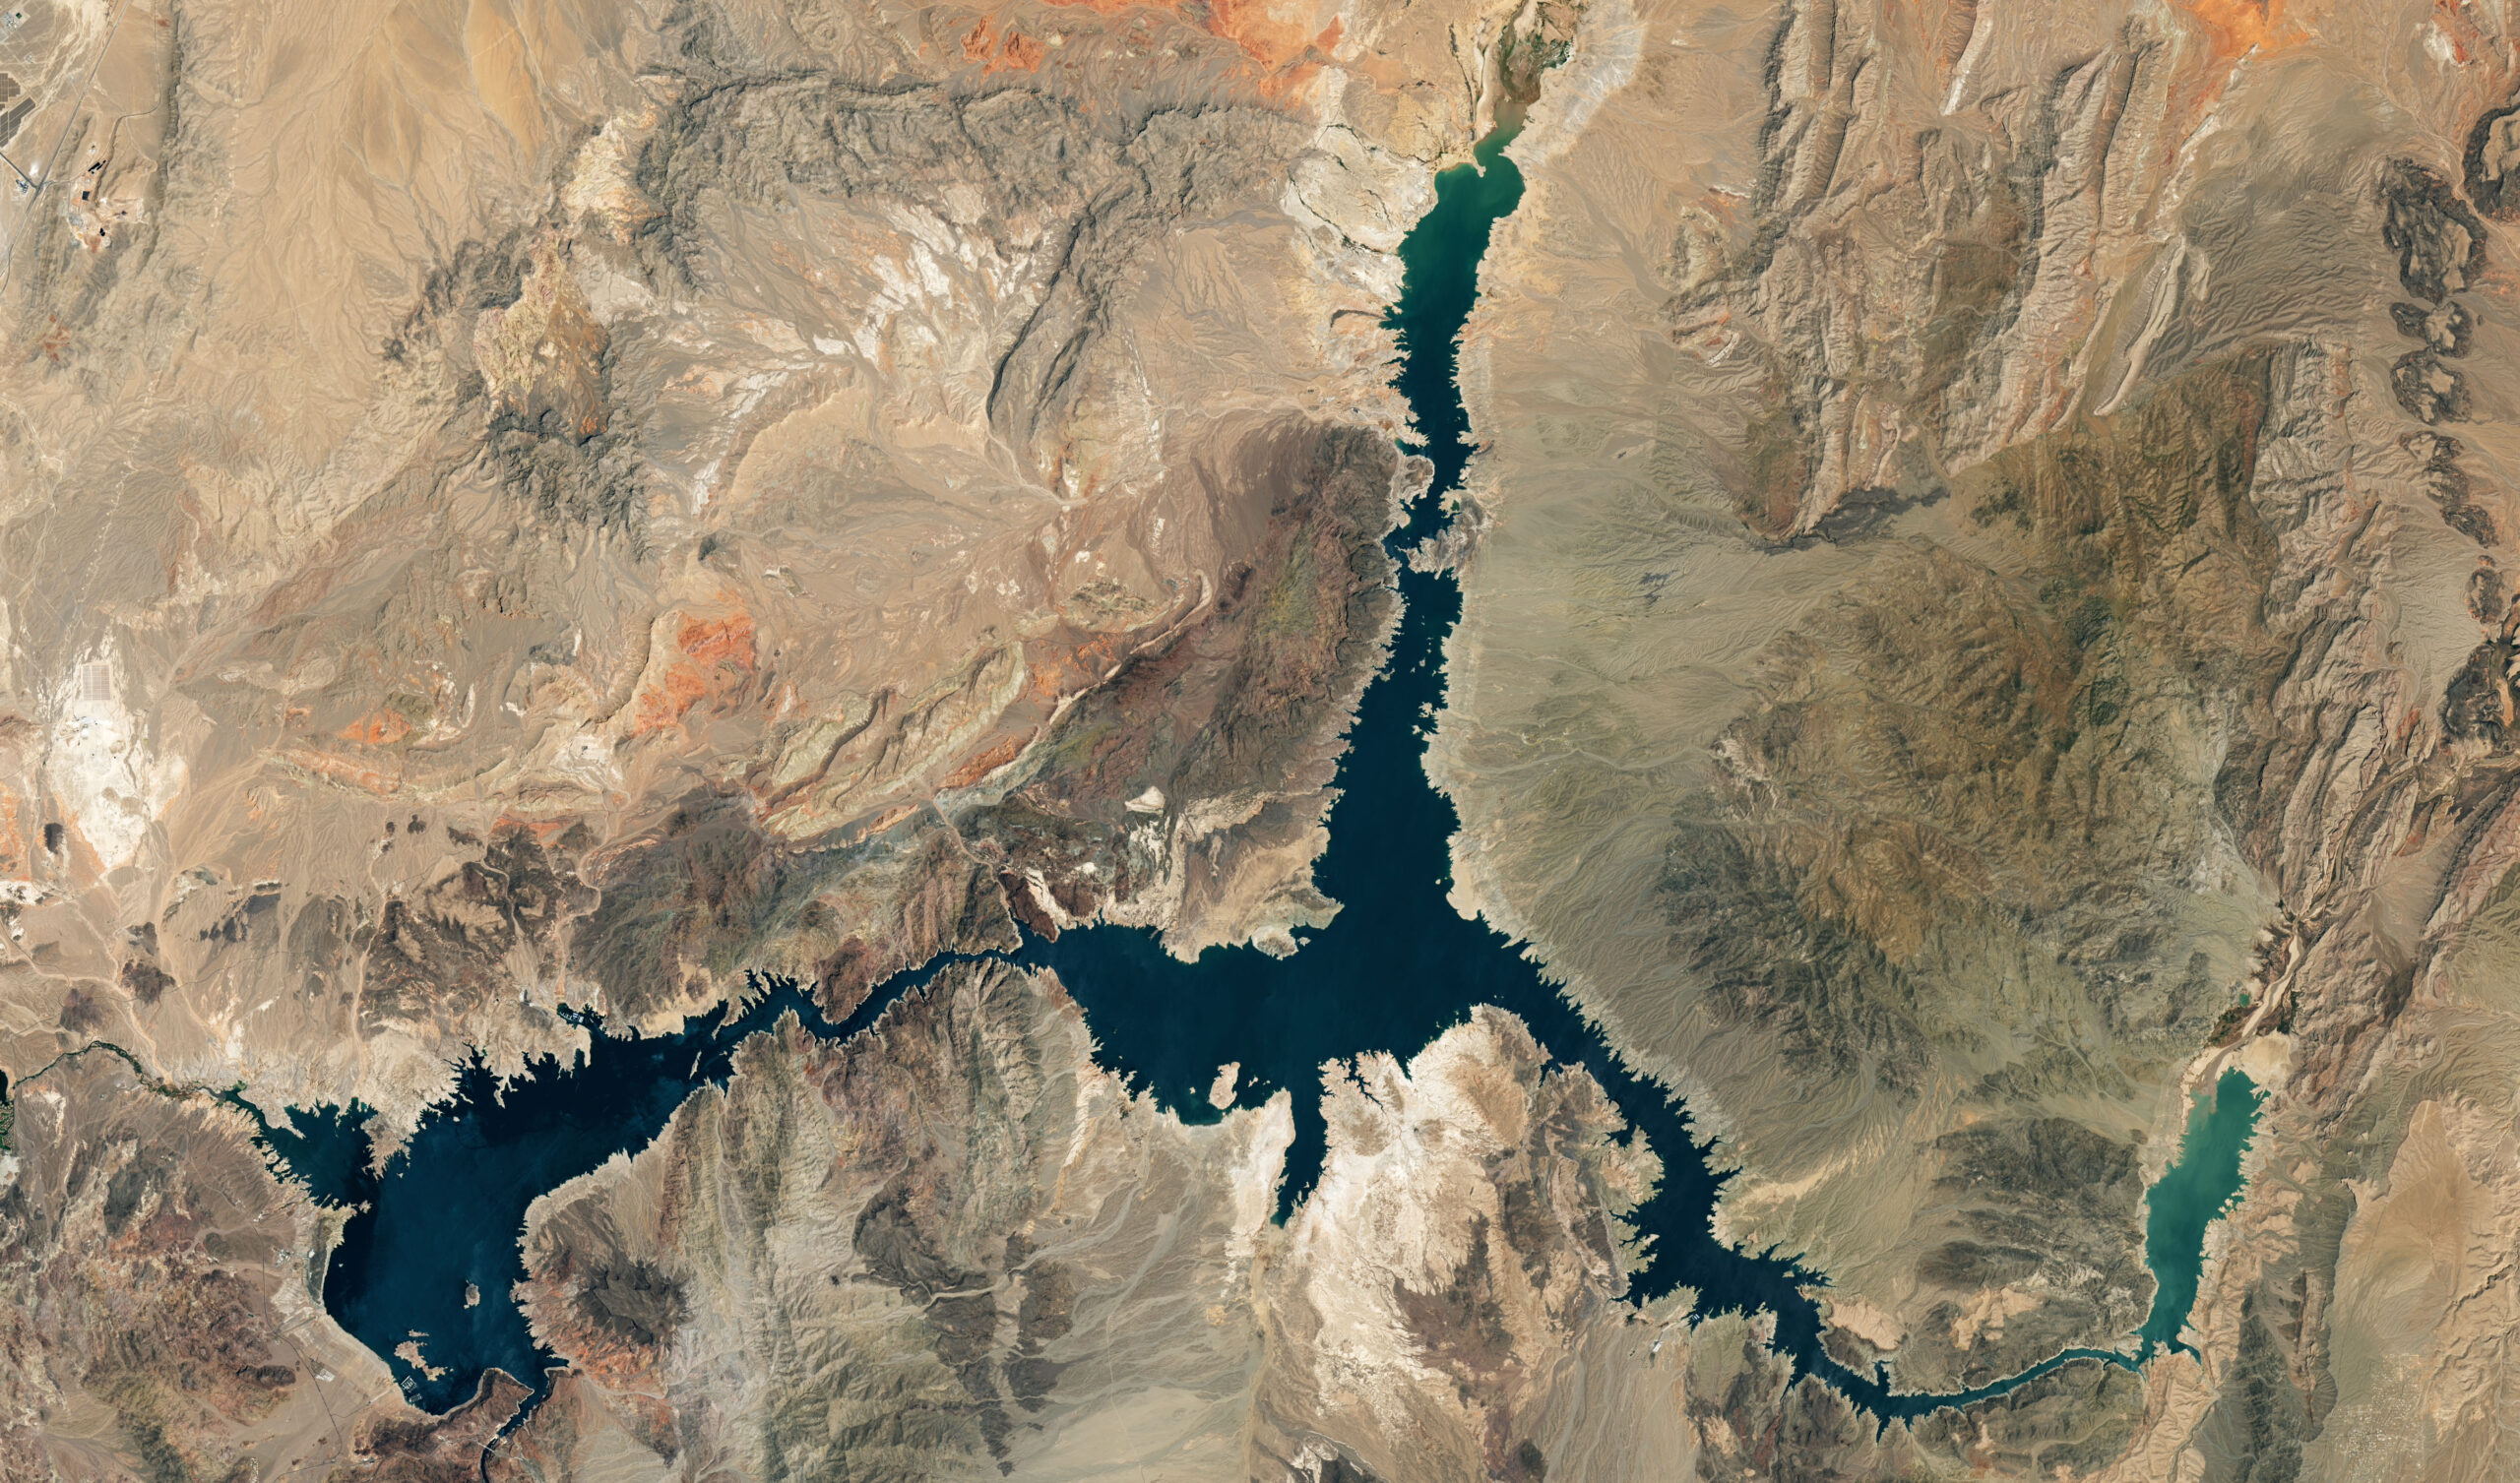 Bass Tournament Forced to Leave Lake Mead Due to Record Low Water Levels